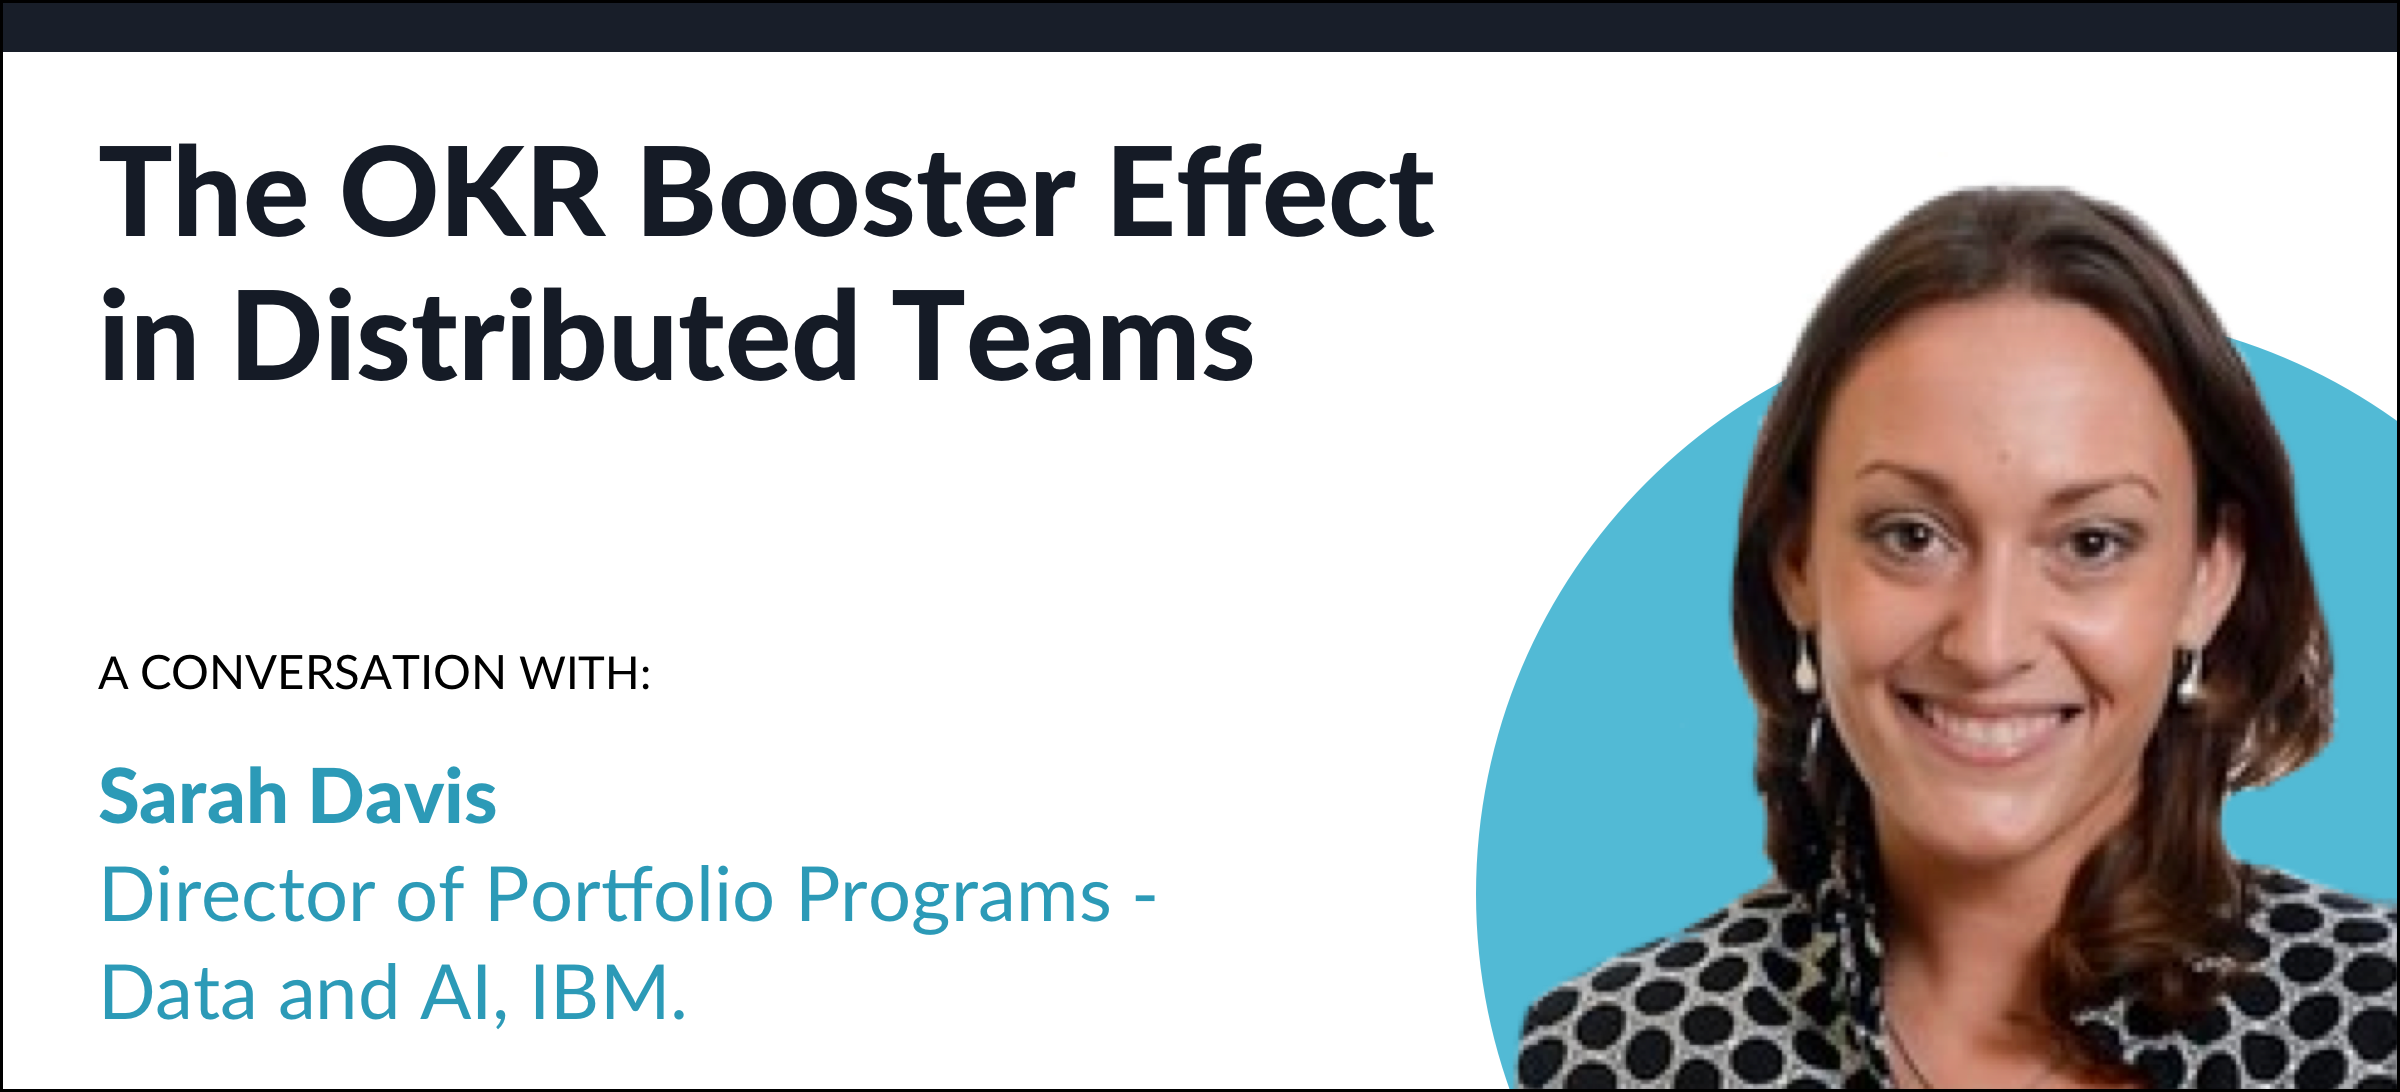 The OKR Booster Effect in Distributed Teams: A conversation with Sarah Davis, Director of Portfolio Programs - Data and AI at IBM